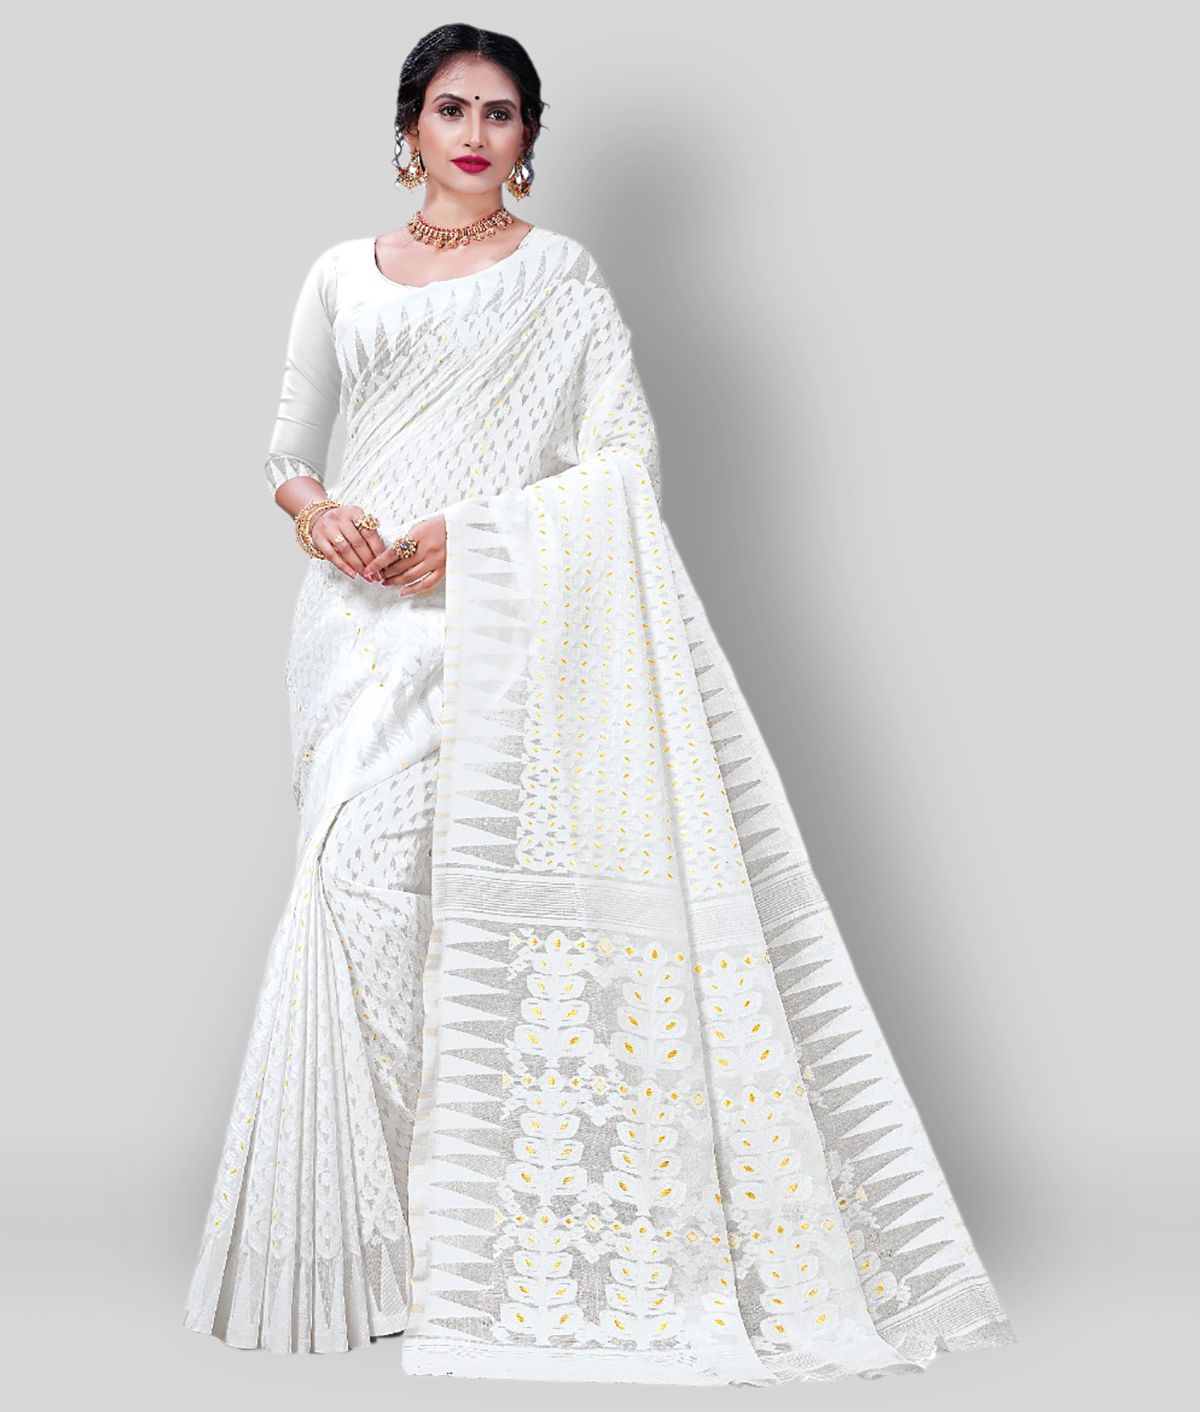     			Panihari Creations - White Cotton Saree Without Blouse Piece (Pack of 1)